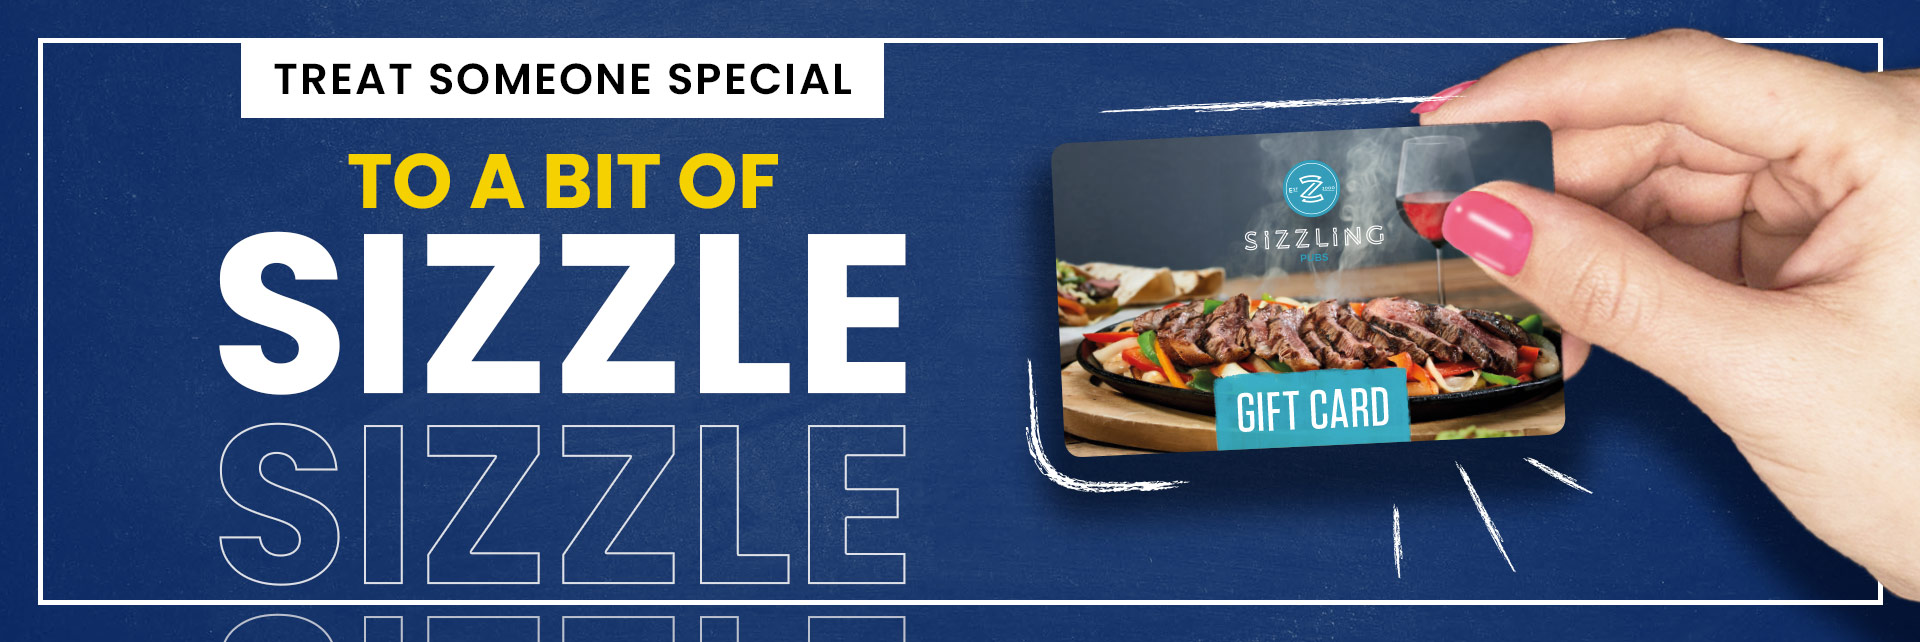 Sizzling Pubs Gift Card at The Two Brothers in Southampton